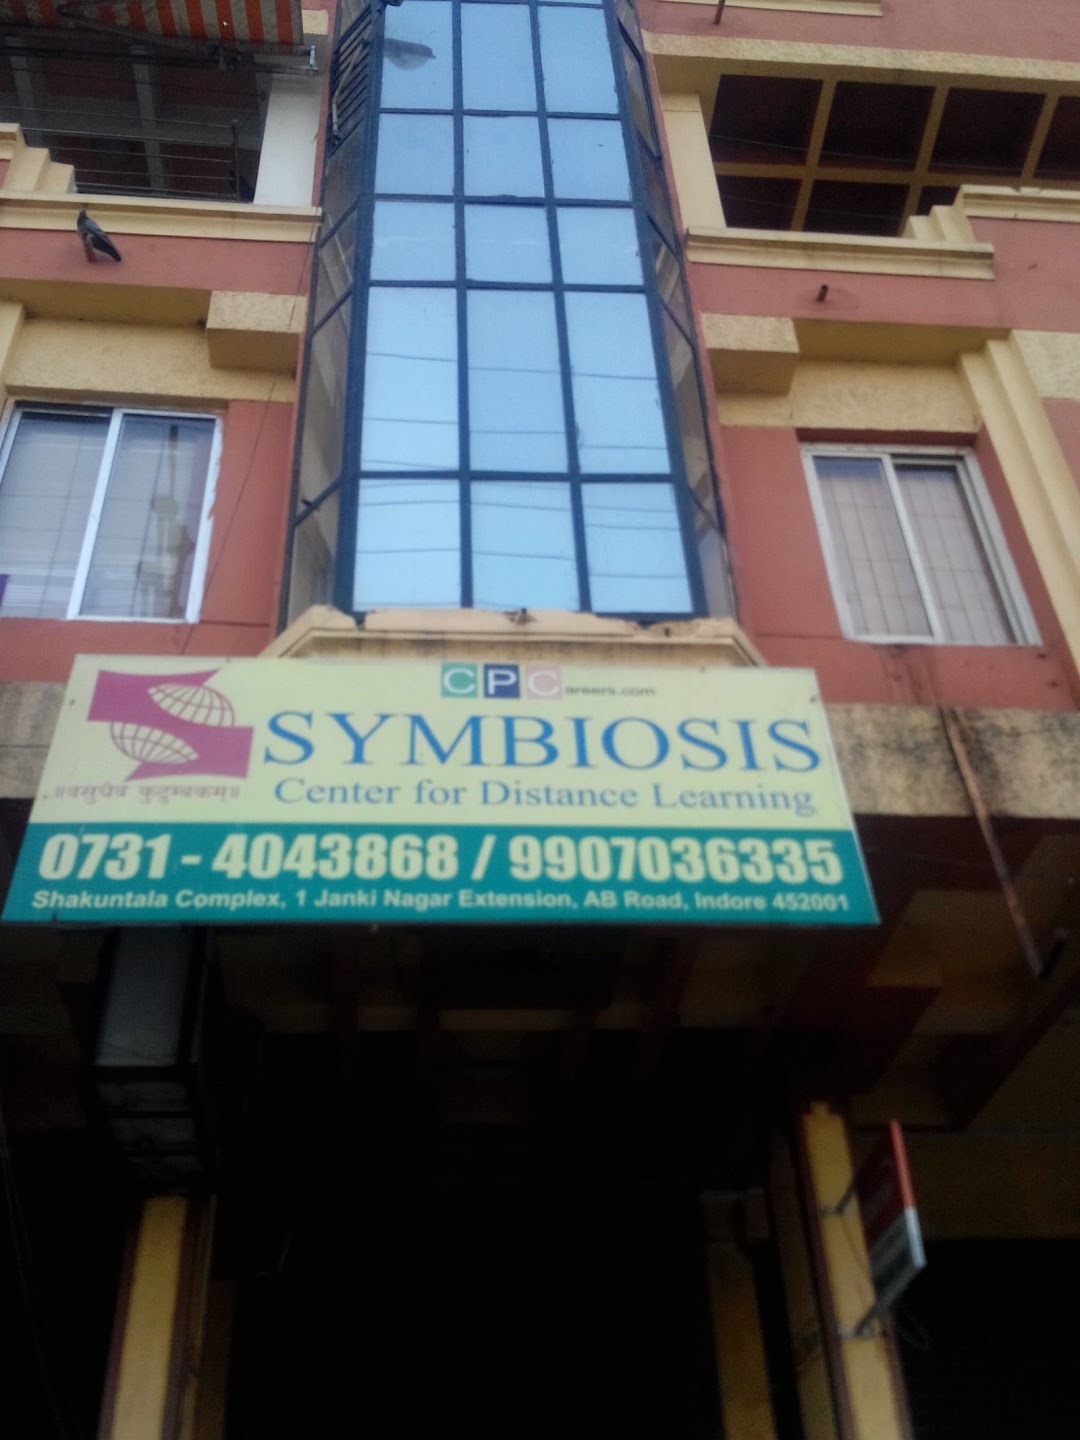 Symbiosis Center For Distance Learning